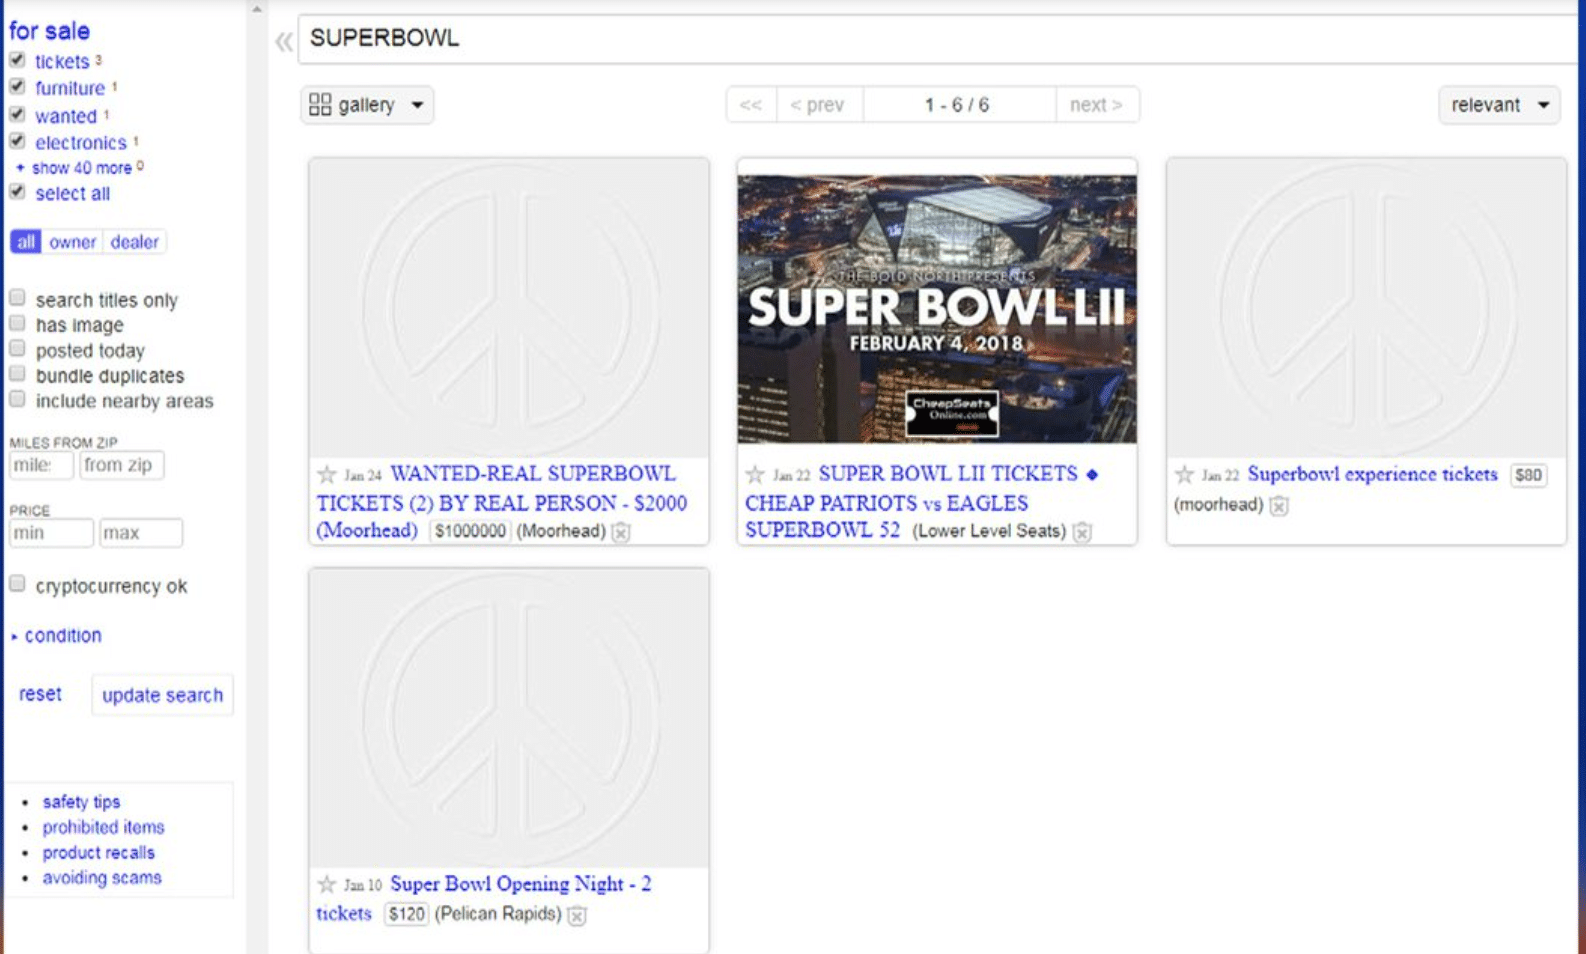 Examples of Super Bowl tickets sold online